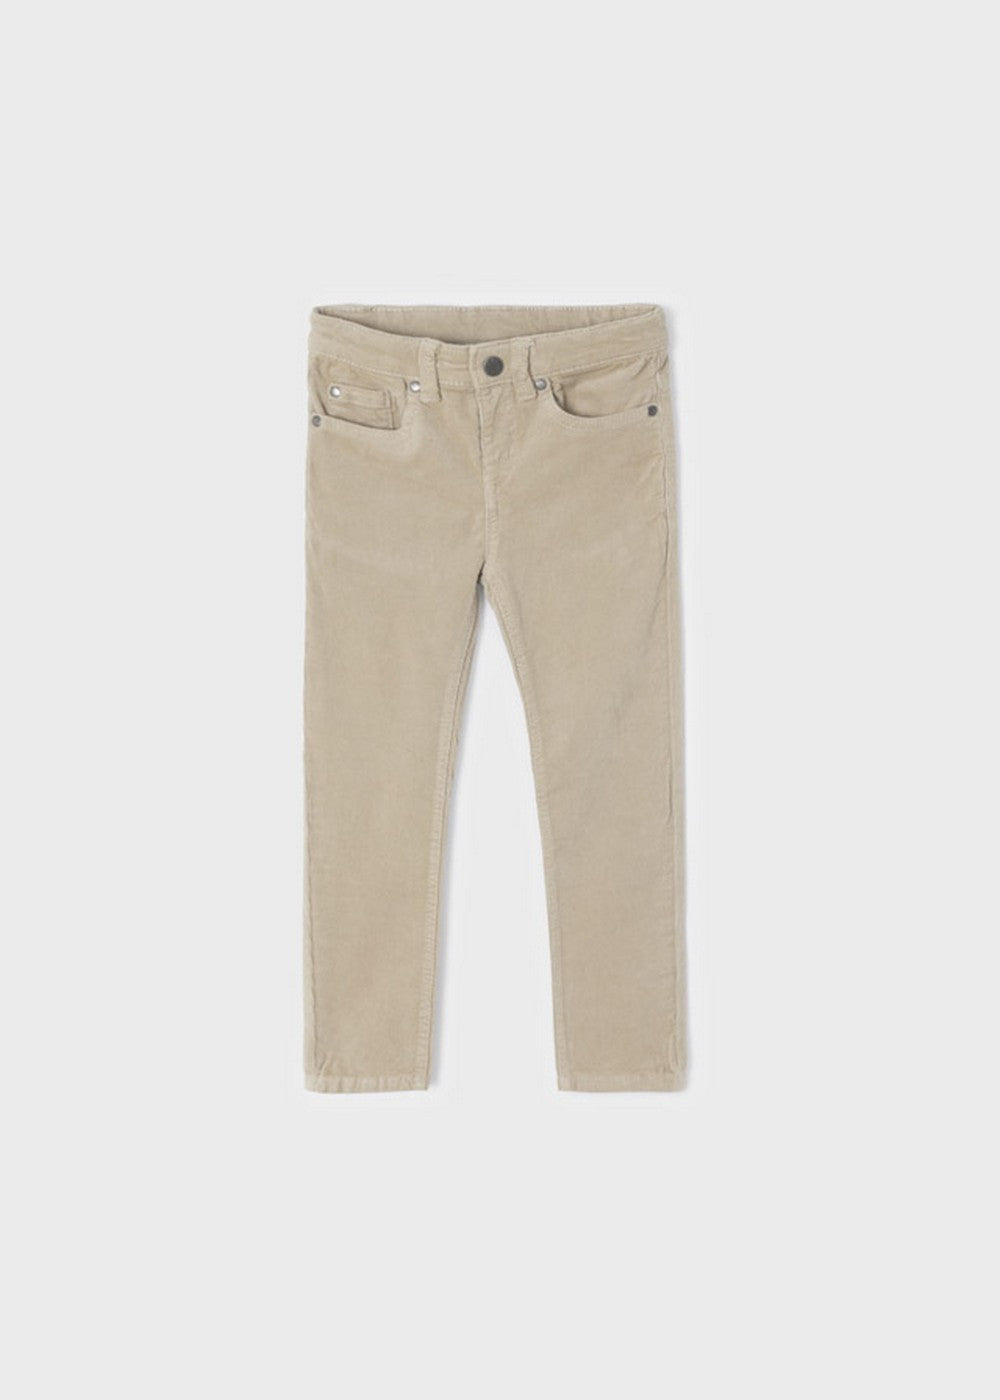 Pantalone In Velluto A Costine Slim Fit Bambino MAYORAL 537 - MAYORAL - LuxuryKids